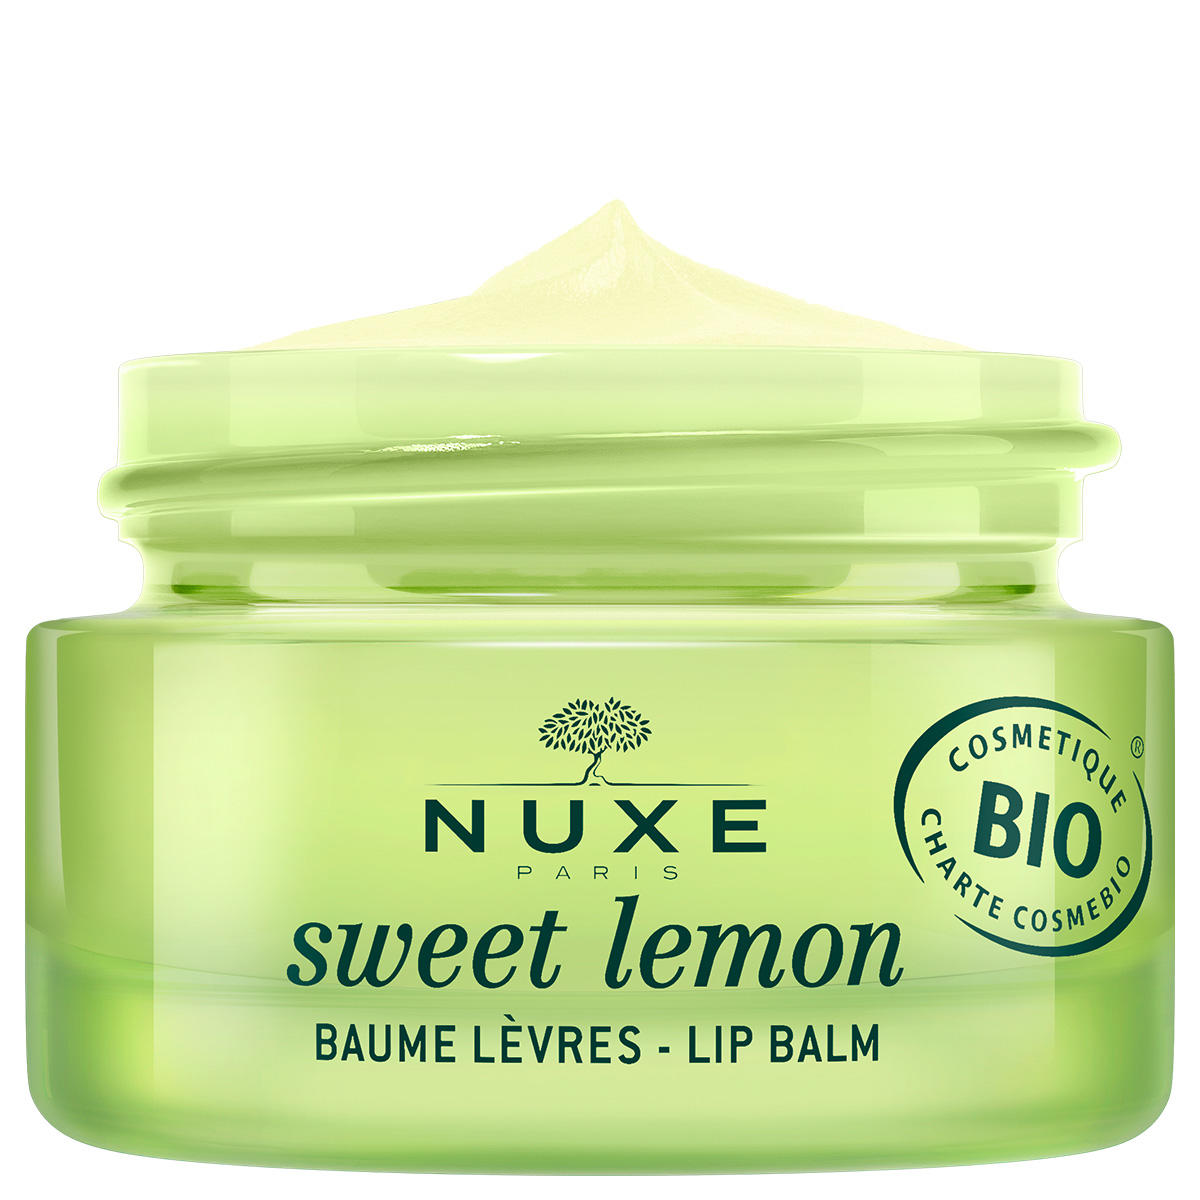 NUXE Baume Lèvres 15 g - 2